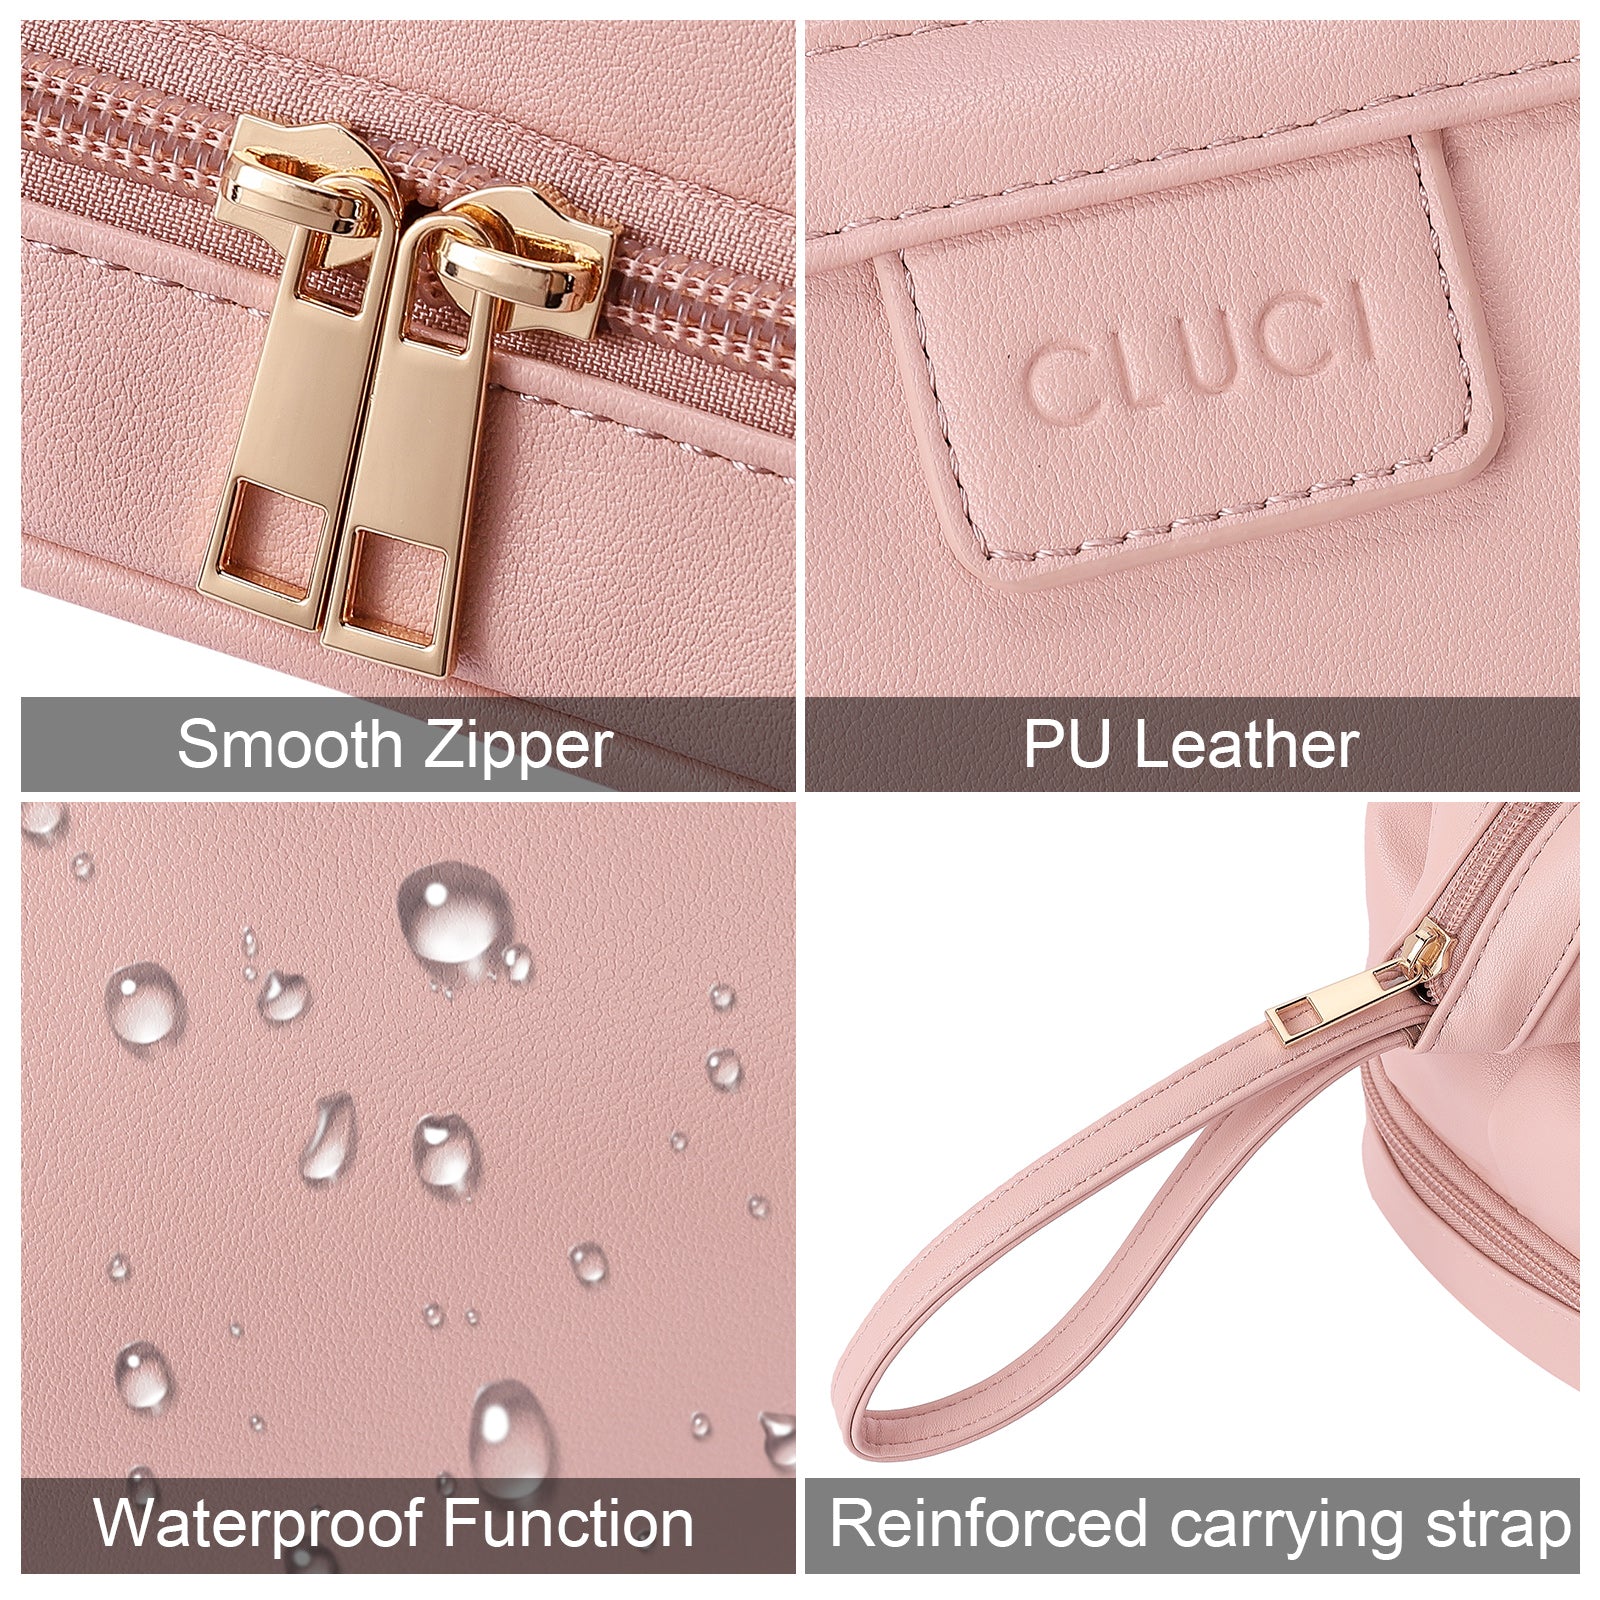 CLUCI Travel Makeup Bag Cosmetic Bag Large Capacity Makeup Bag Organizer PU Leather Water-resistant Women Double Layer Portable Cosmetic Travel Bags Traveling Toiletry Bag